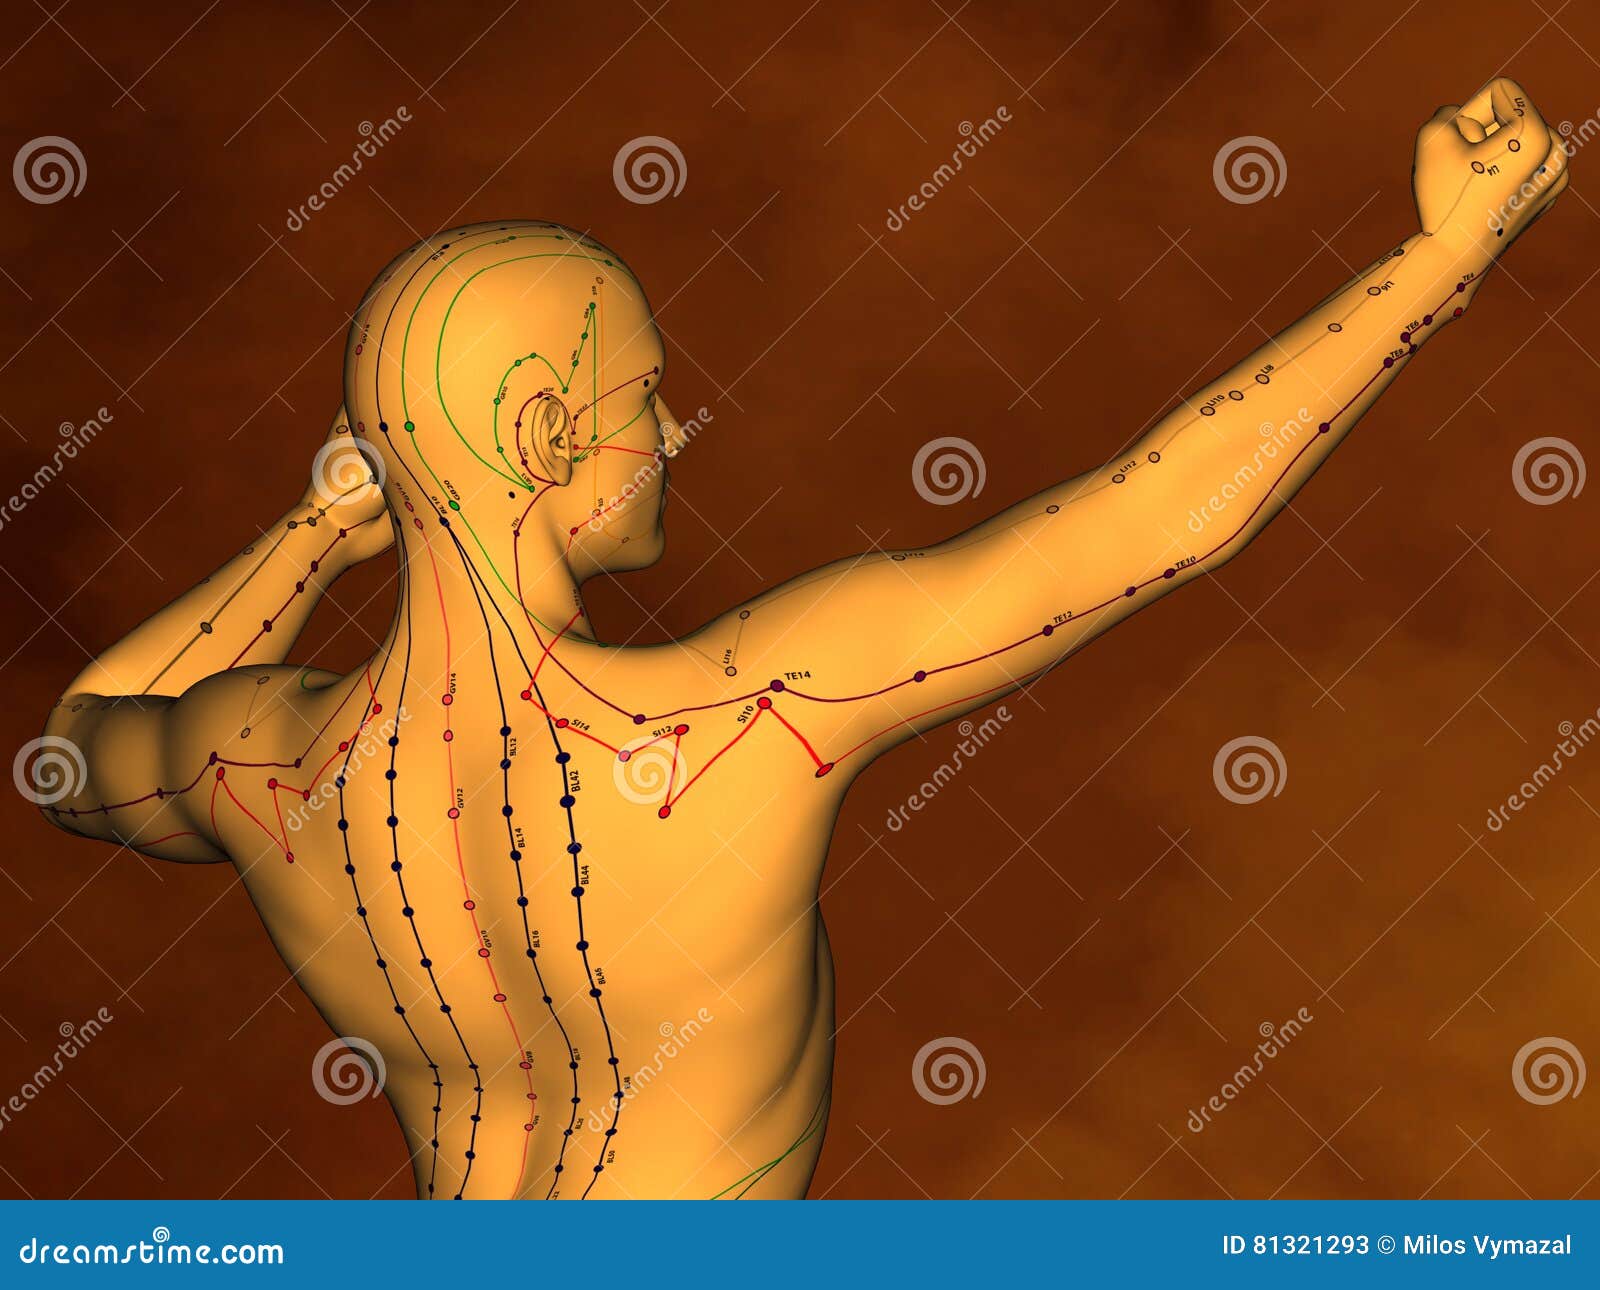 acupuncture model m-pose m4ay-10-1, 3d model